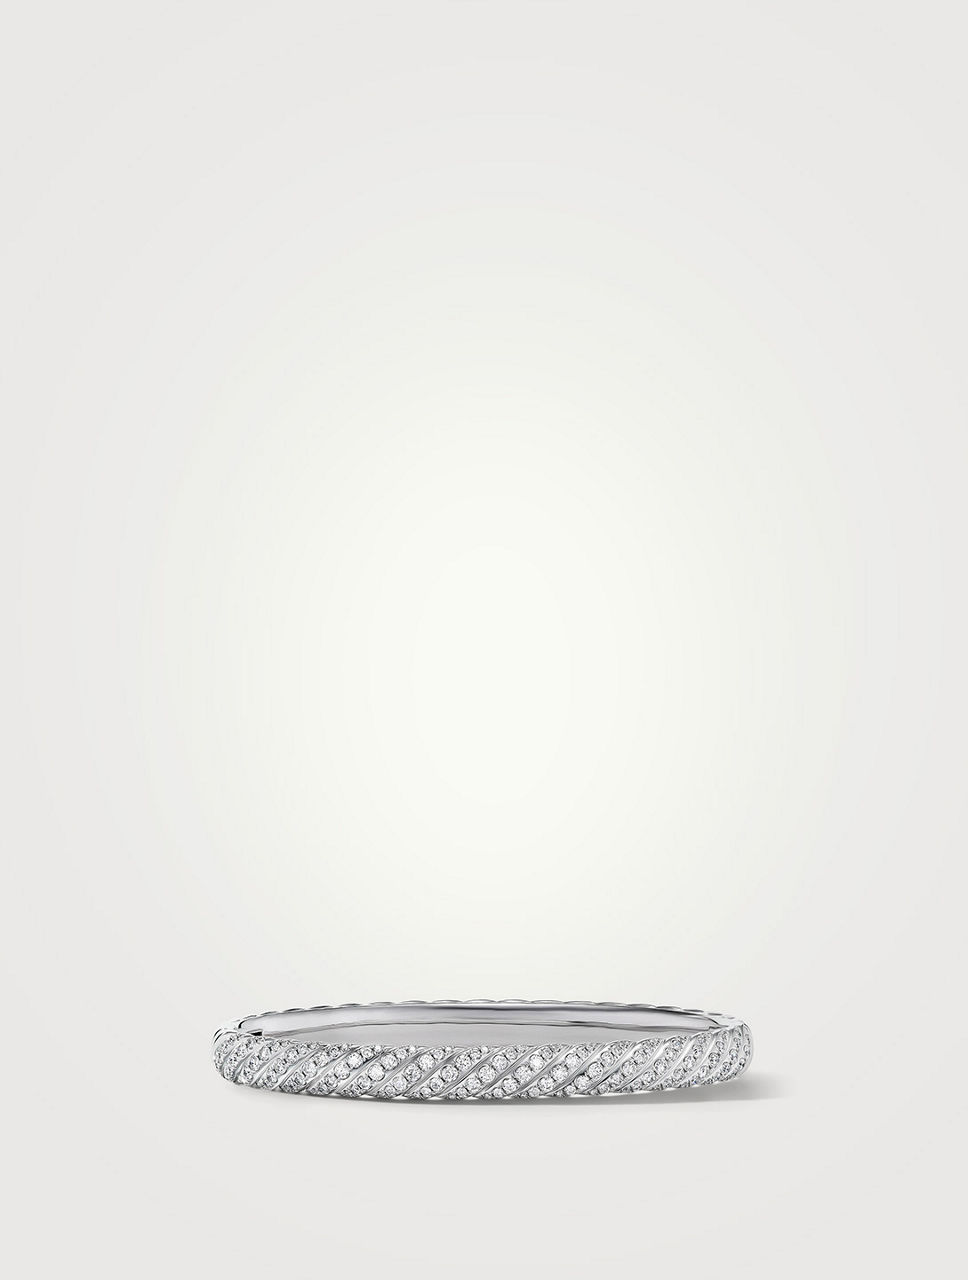 DAVID YURMAN Sculpted Cable Bangle Bracelet In 18k White Gold With